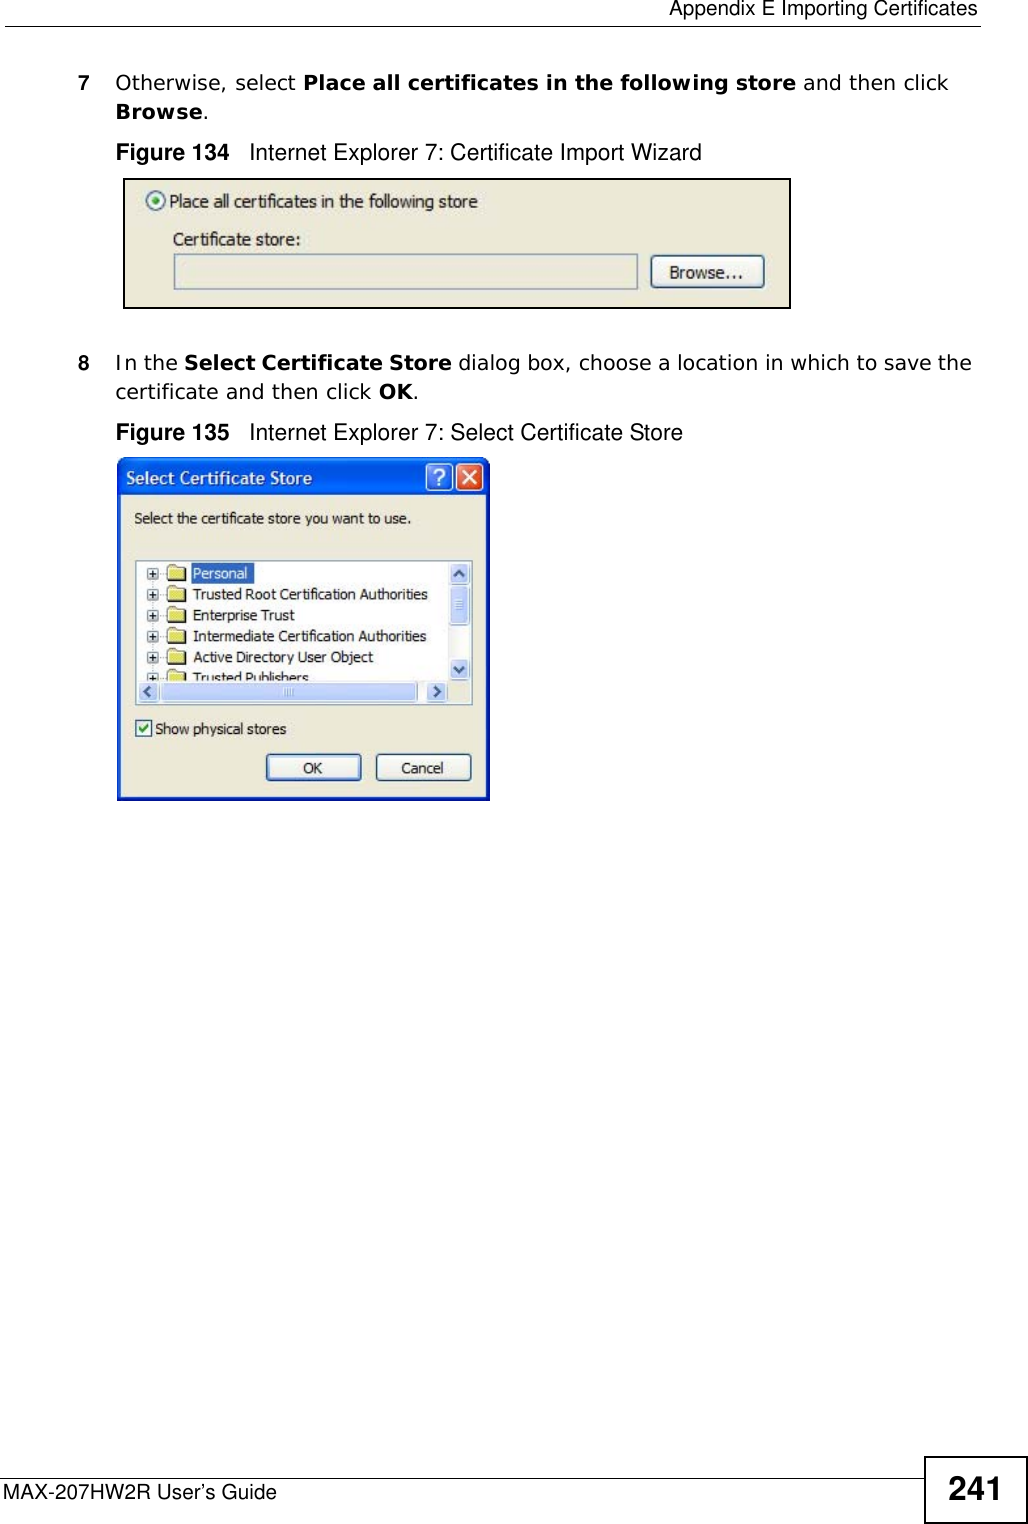  Appendix E Importing CertificatesMAX-207HW2R User’s Guide 2417Otherwise, select Place all certificates in the following store and then click Browse.Figure 134   Internet Explorer 7: Certificate Import Wizard8In the Select Certificate Store dialog box, choose a location in which to save the certificate and then click OK.Figure 135   Internet Explorer 7: Select Certificate Store